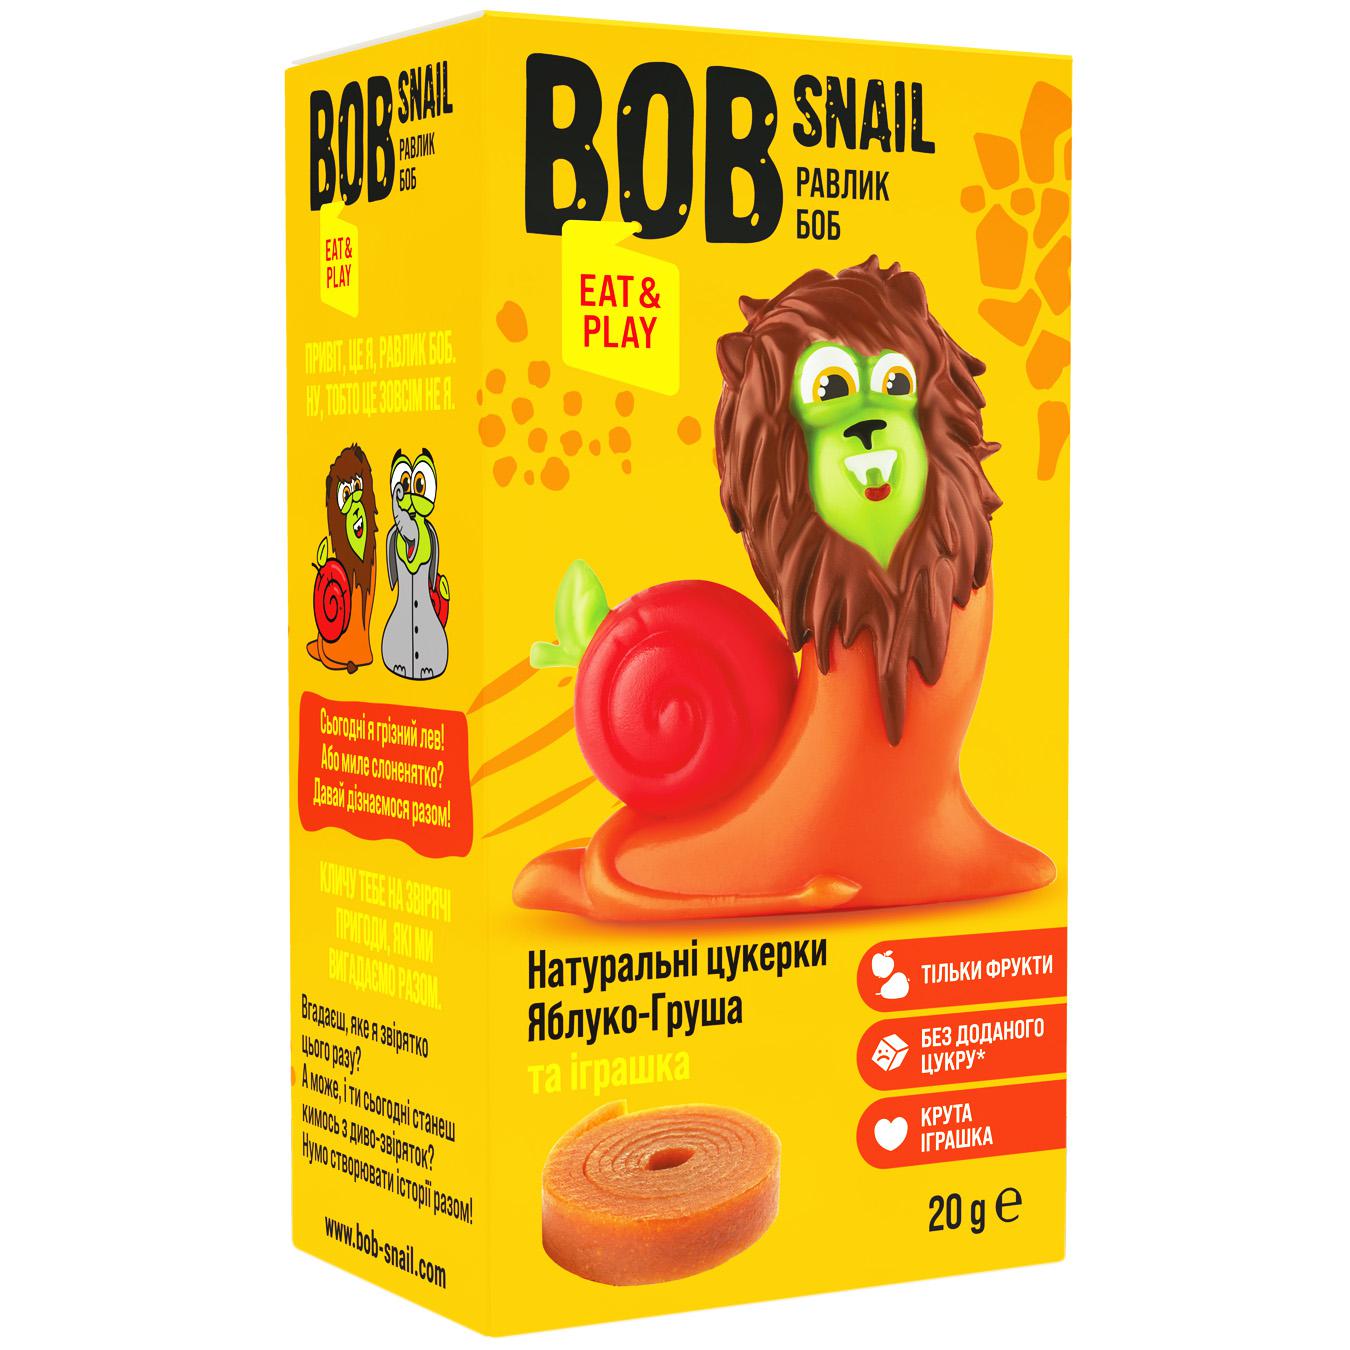 Set of Candies Bob Snail Apple-pear 20g and Toy